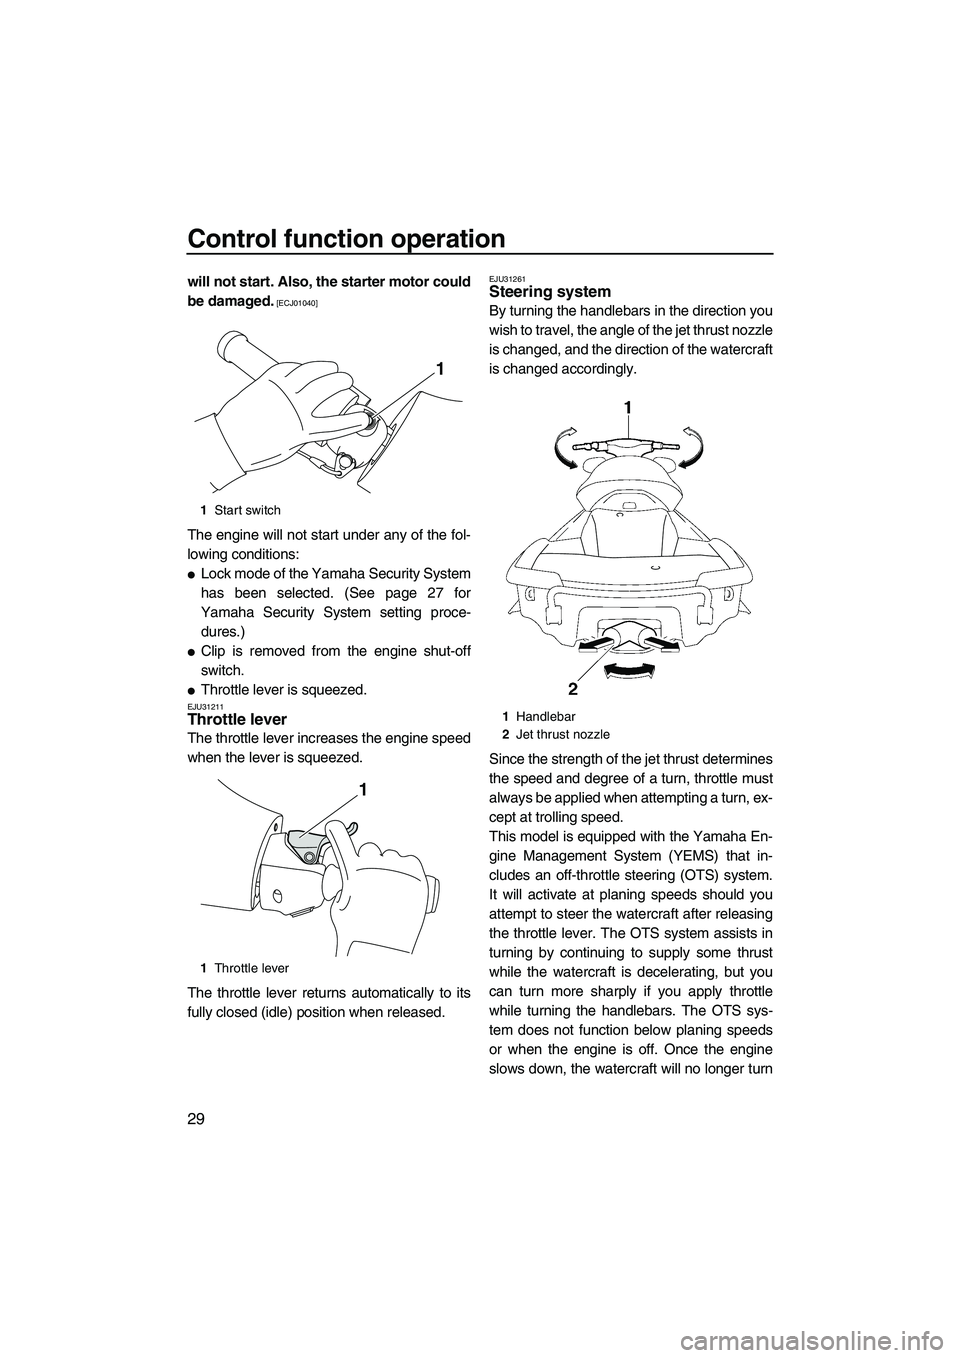 YAMAHA FX SHO 2010  Owners Manual Control function operation
29
will not start. Also, the starter motor could
be damaged.
 [ECJ01040]
The engine will not start under any of the fol-
lowing conditions:
Lock mode of the Yamaha Security